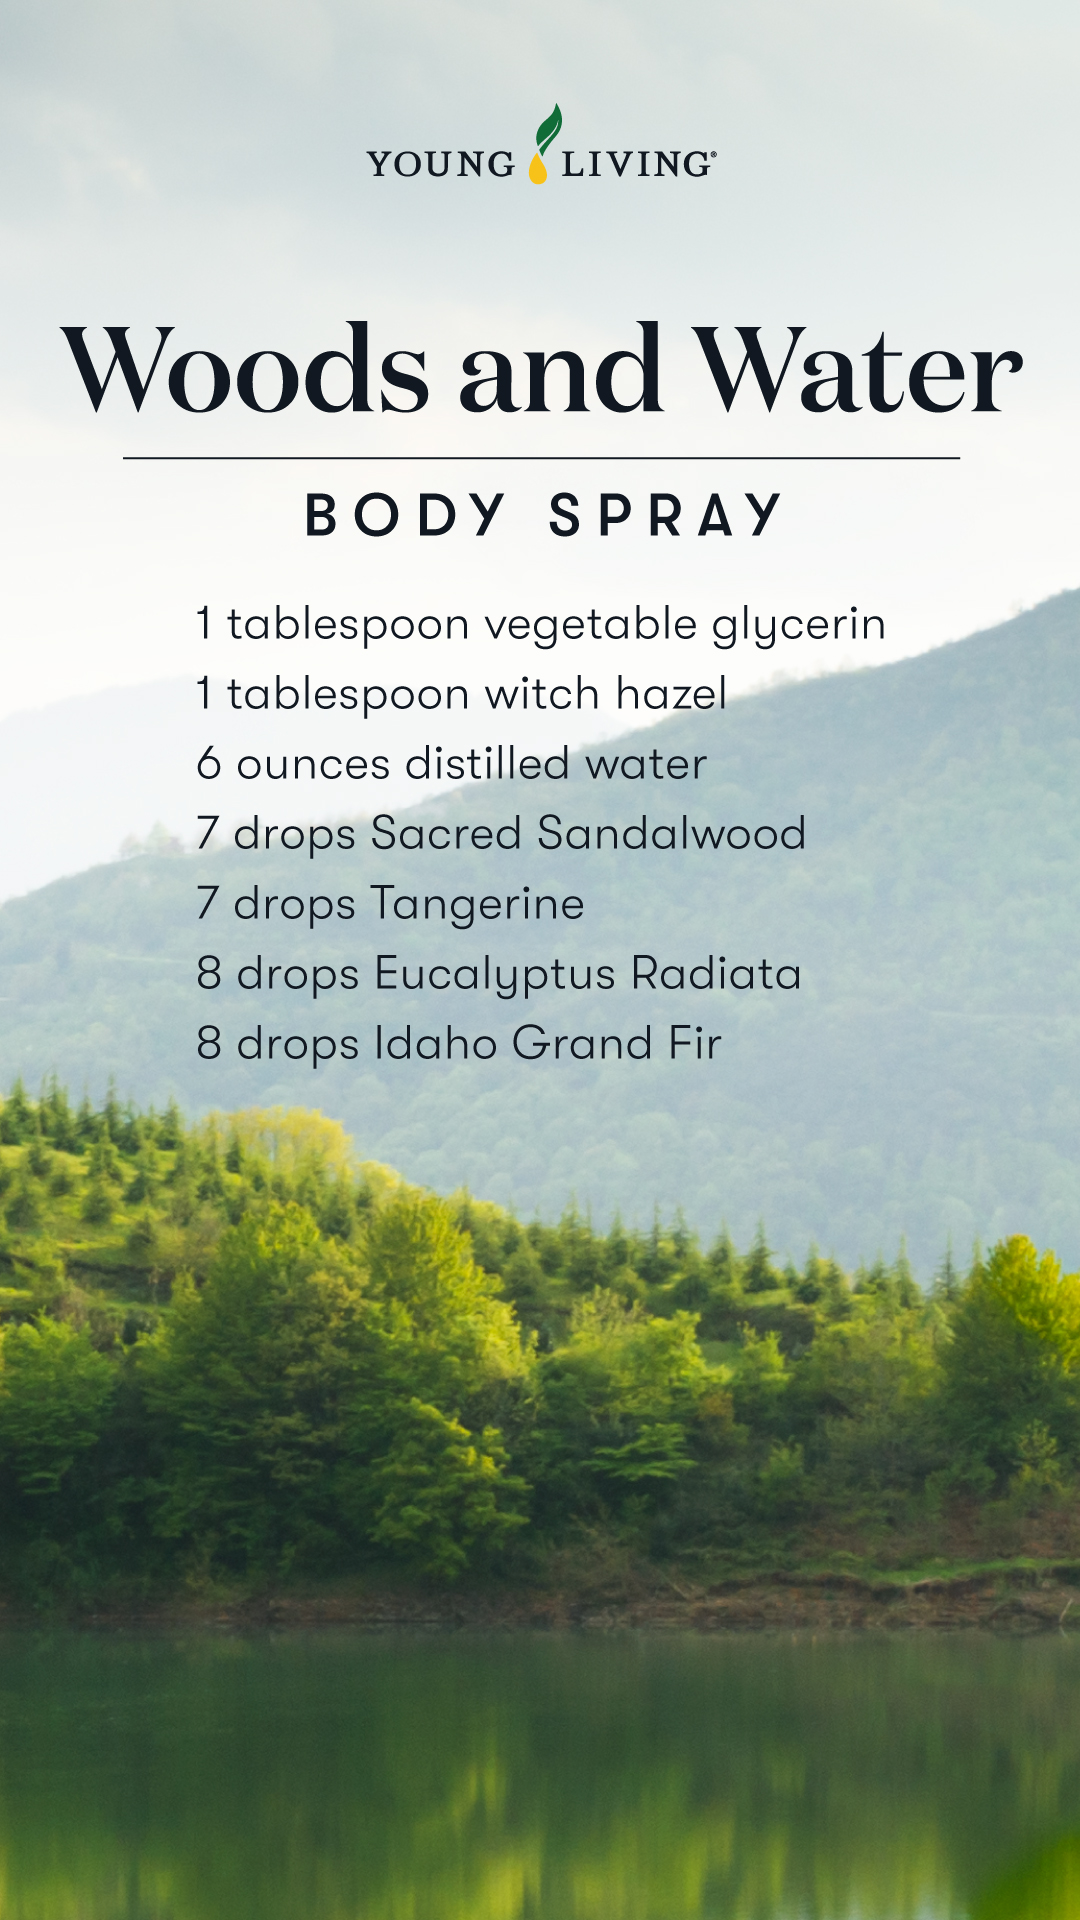 Woods & Water body spray recipe - Young Living Lavender Life Blog